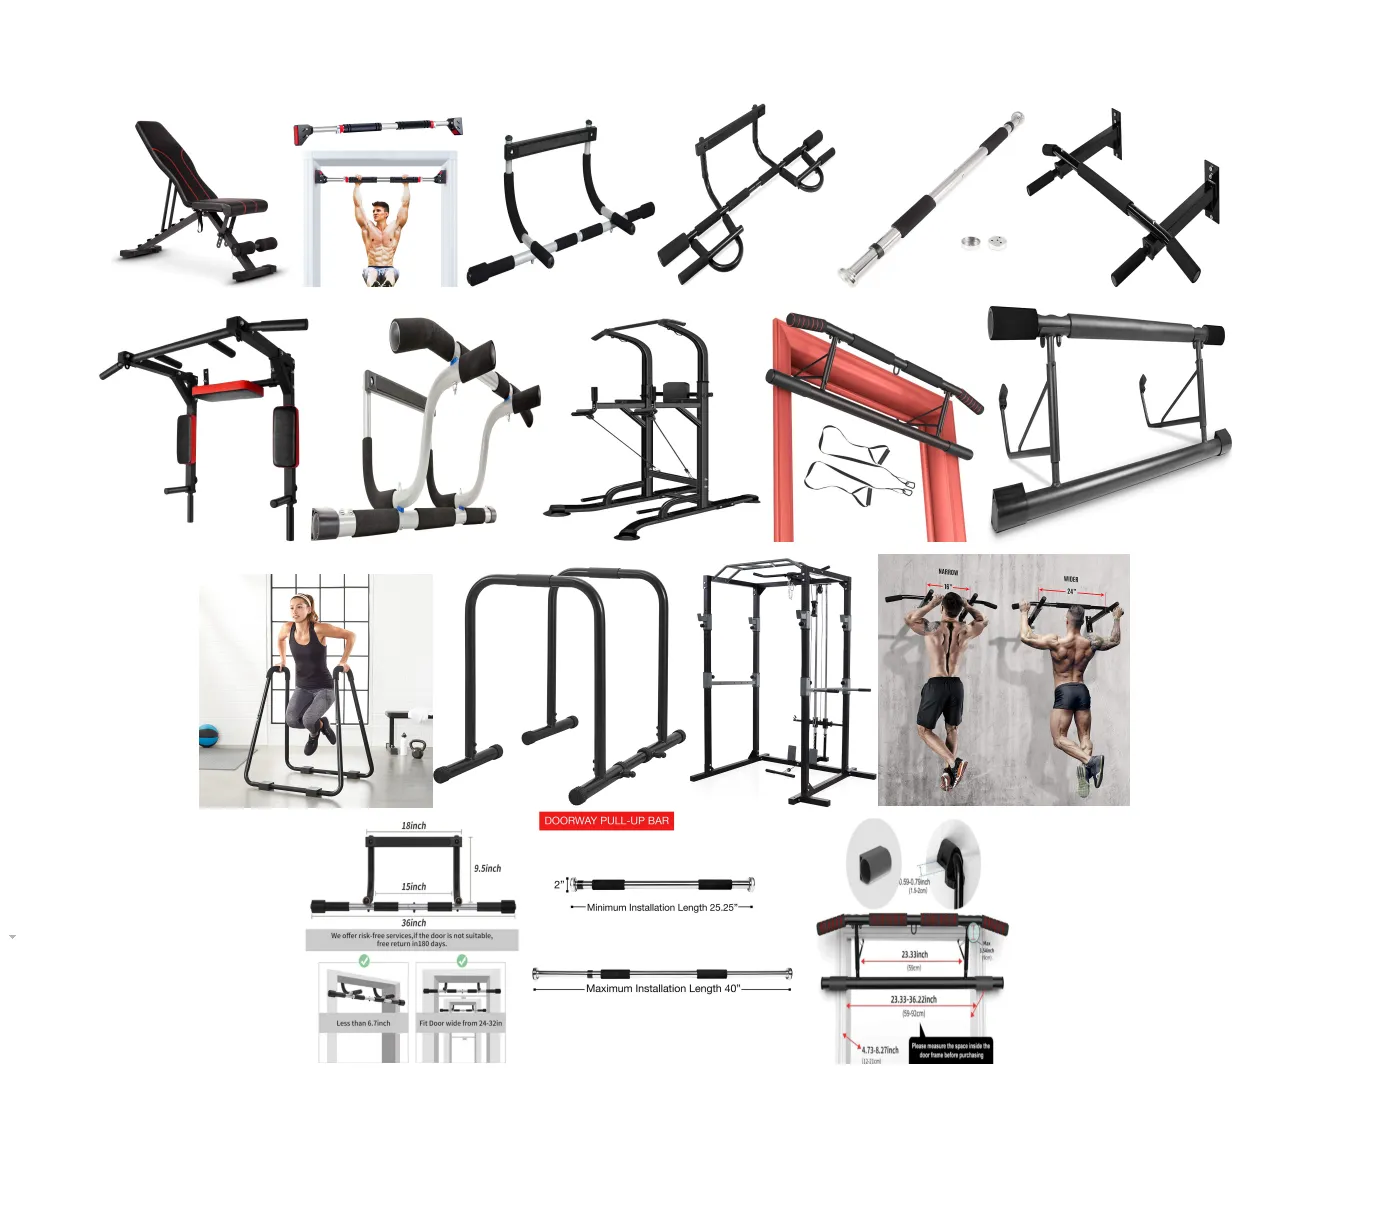 exercise chin up bar,exercise equipment chin up bar,exercise equipment chin up,exercise chin up,exercise bands chin bar